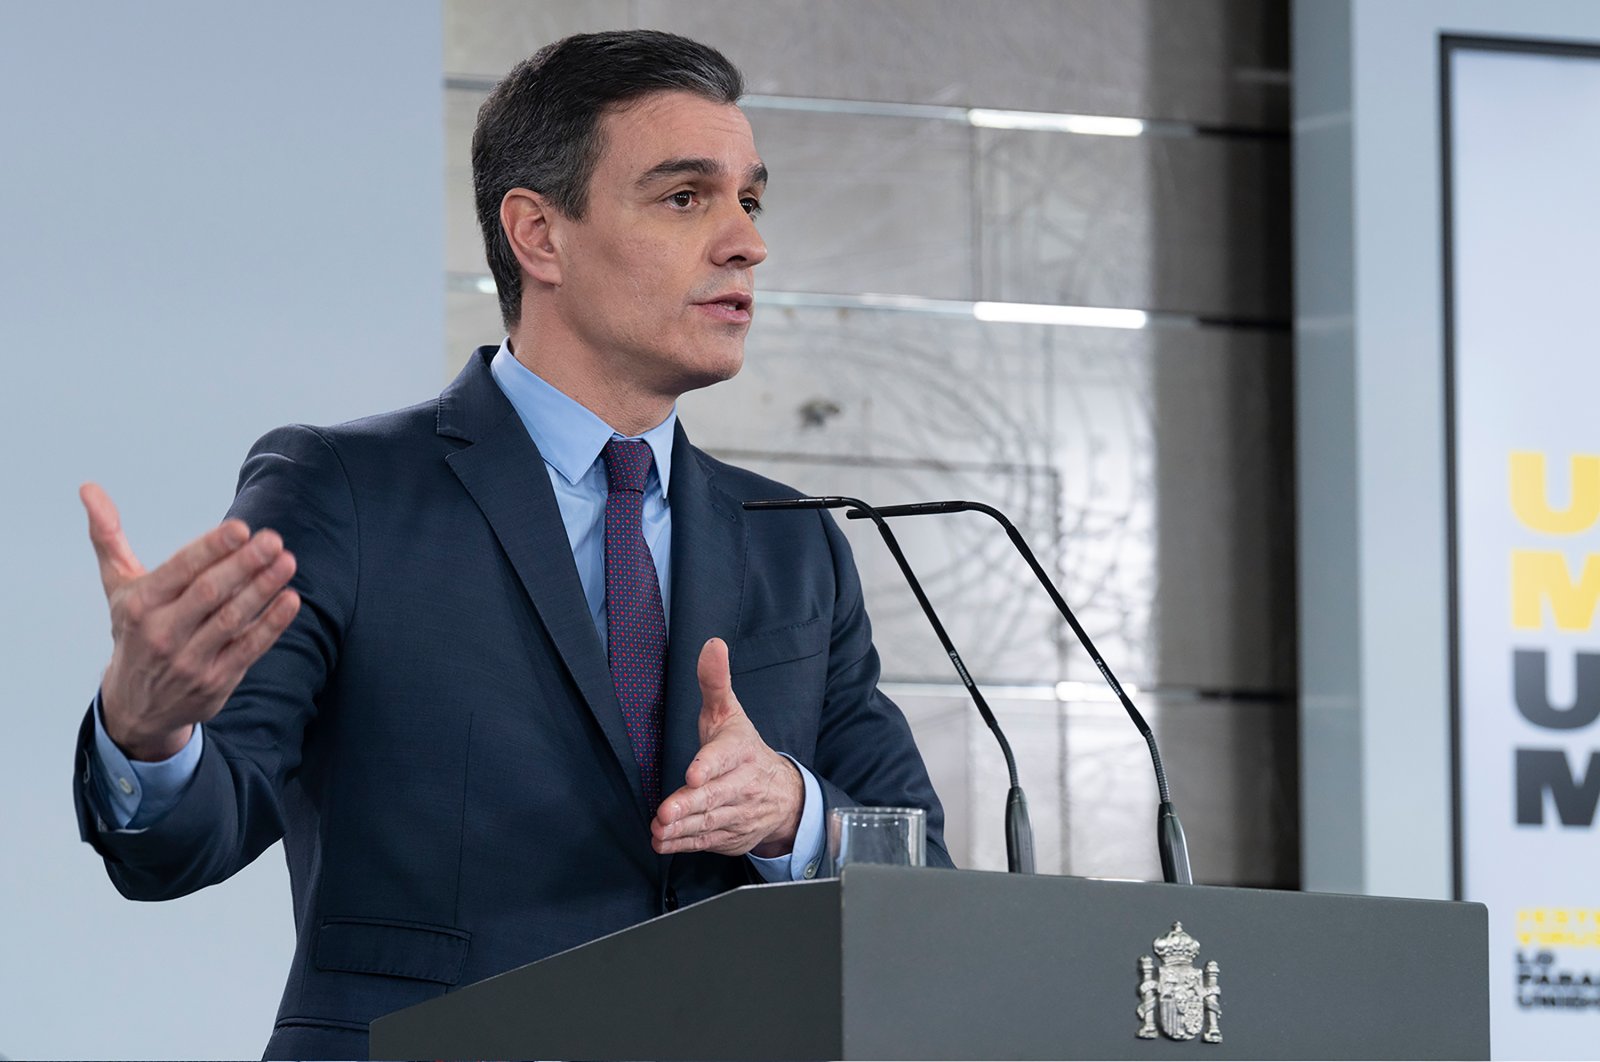 This handout picture made available by La Moncloa Palace (the Spanish Presidency) on April 4, 2020, shows Spanish Prime Minister Pedro Sanchez giving a press conference in Madrid. (AFP Photo)